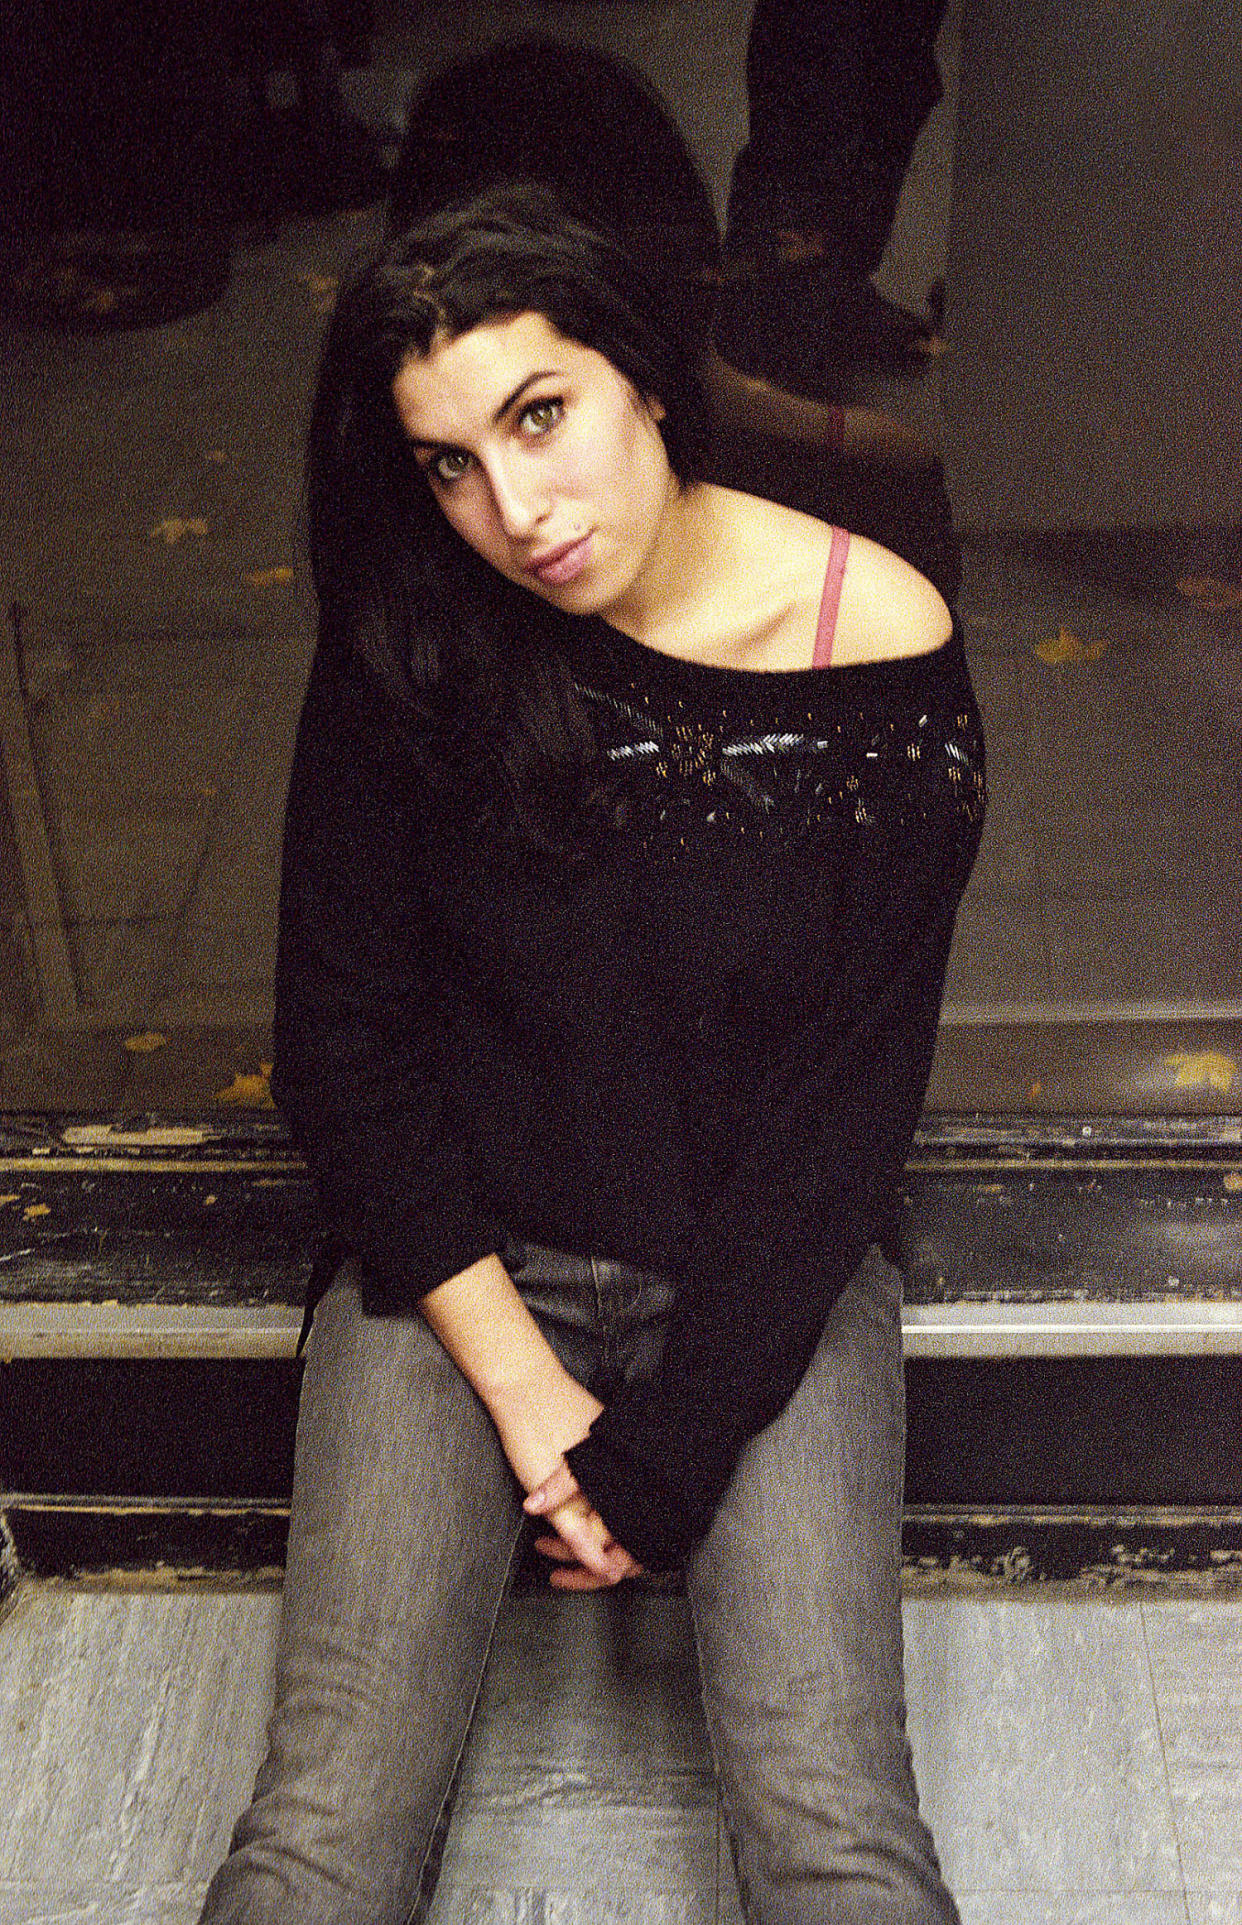 Amy Winehouse in February of 2003. (Rick Smee / Redferns)